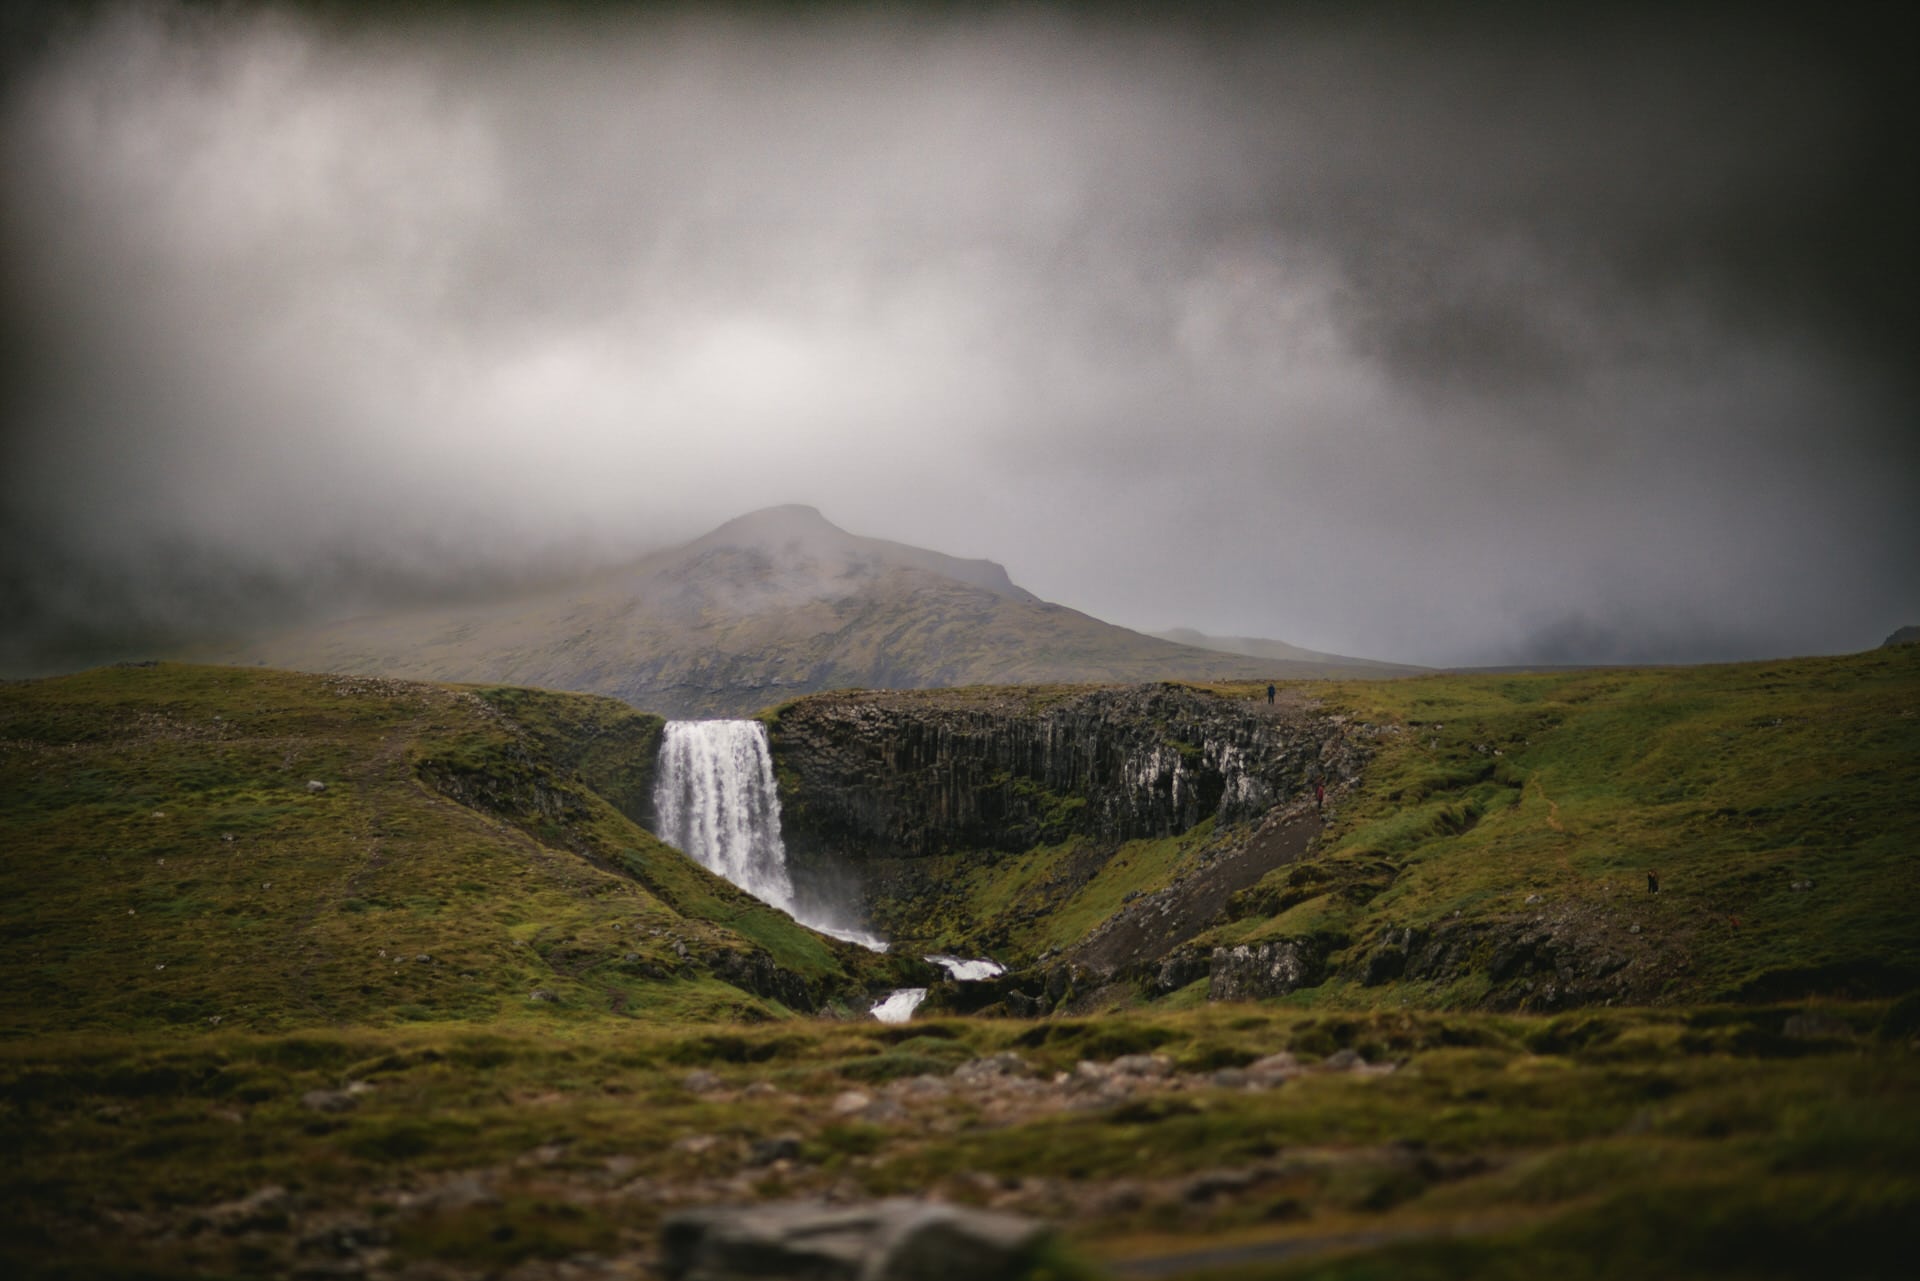 Grundarfoss waterfall on the Kirkjufell peninsula in Iceland, perfect for an elopement ceremony